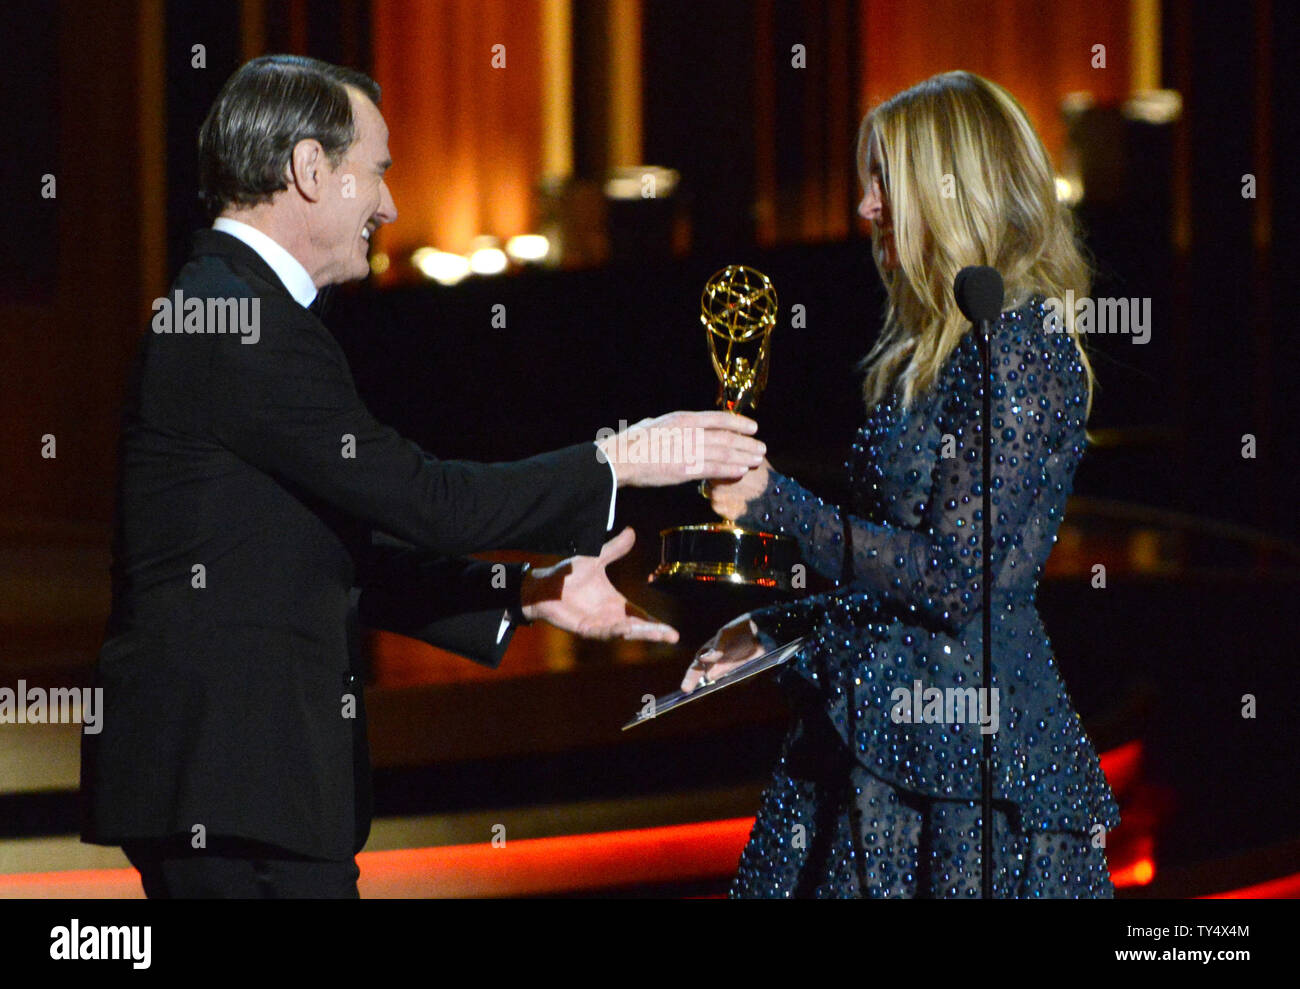 Julia Roberts, right, presents Bryan Cranston with the award for outstanding lead actor in a drama series for his work in 'Breaking Bad' during the Primetime Emmy Awards at the Nokia Theatre in Los Angeles on August 25, 2014.     UPI/Pat Benic Stock Photo